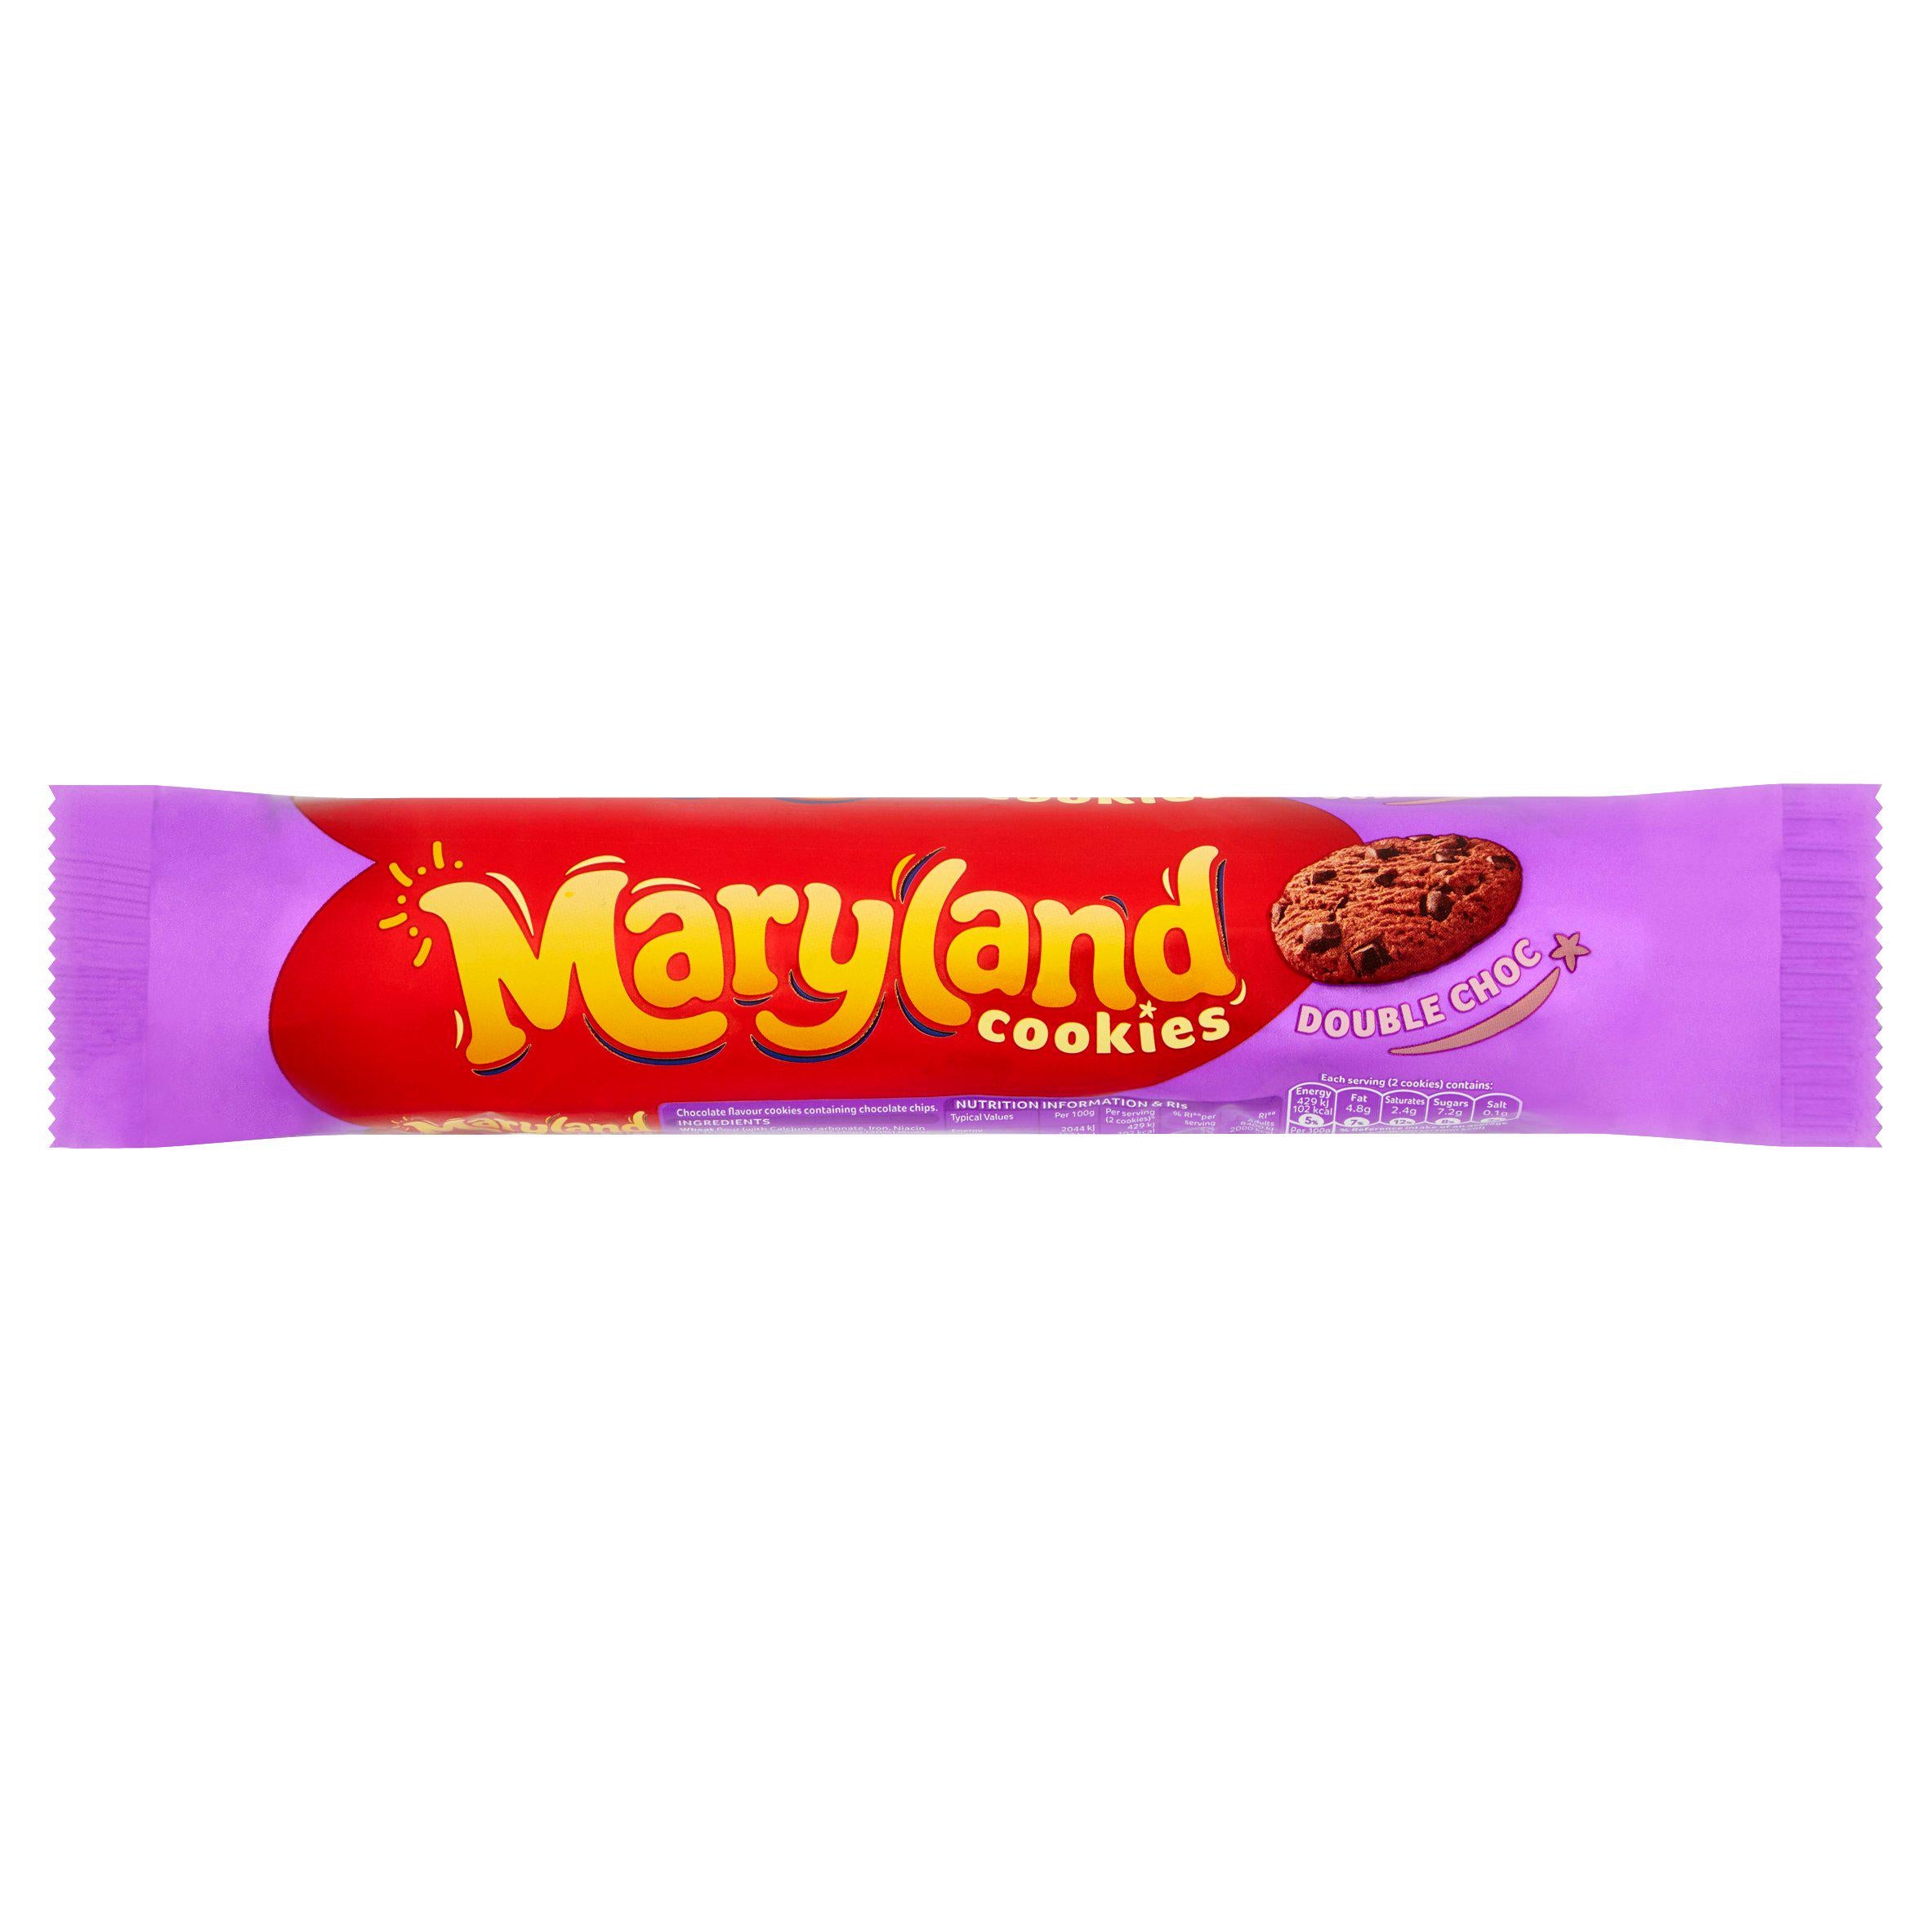 Maryland Cookies Double Choc Chip - Big Pack 230g